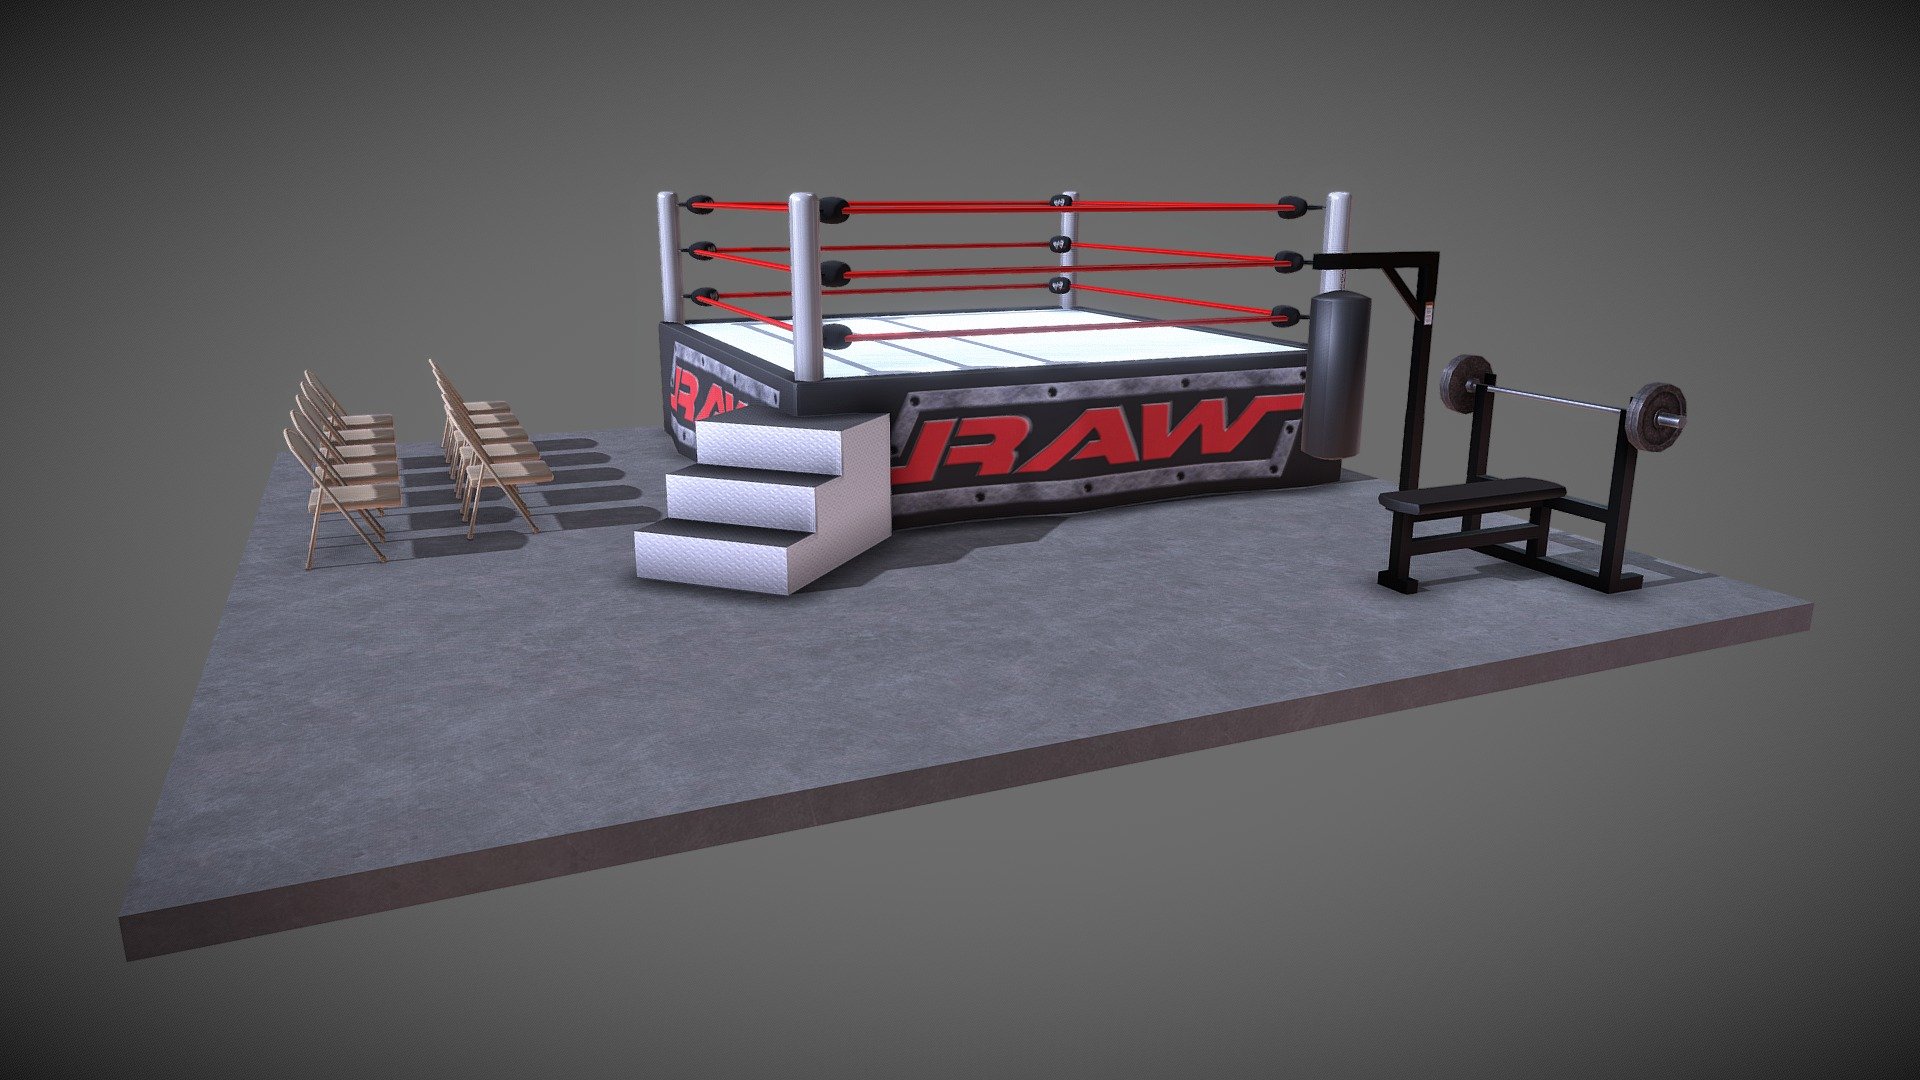 This is a personal project of mine over the span of a couple days. As a life-long WWE fan, it felt like a no-brainer to create some fan art for my portfolio. It's a bit of a different direction from my other pieces, but I'm proud of the outcome.

The WWE and Monday Night Raw logos are all rights to World Wrestling Entertainment, Inc.

Polished Concrete, Threadplate Metal, Rough Steel, and Brushed Aluminum were all downloaded from textures.com 3d model